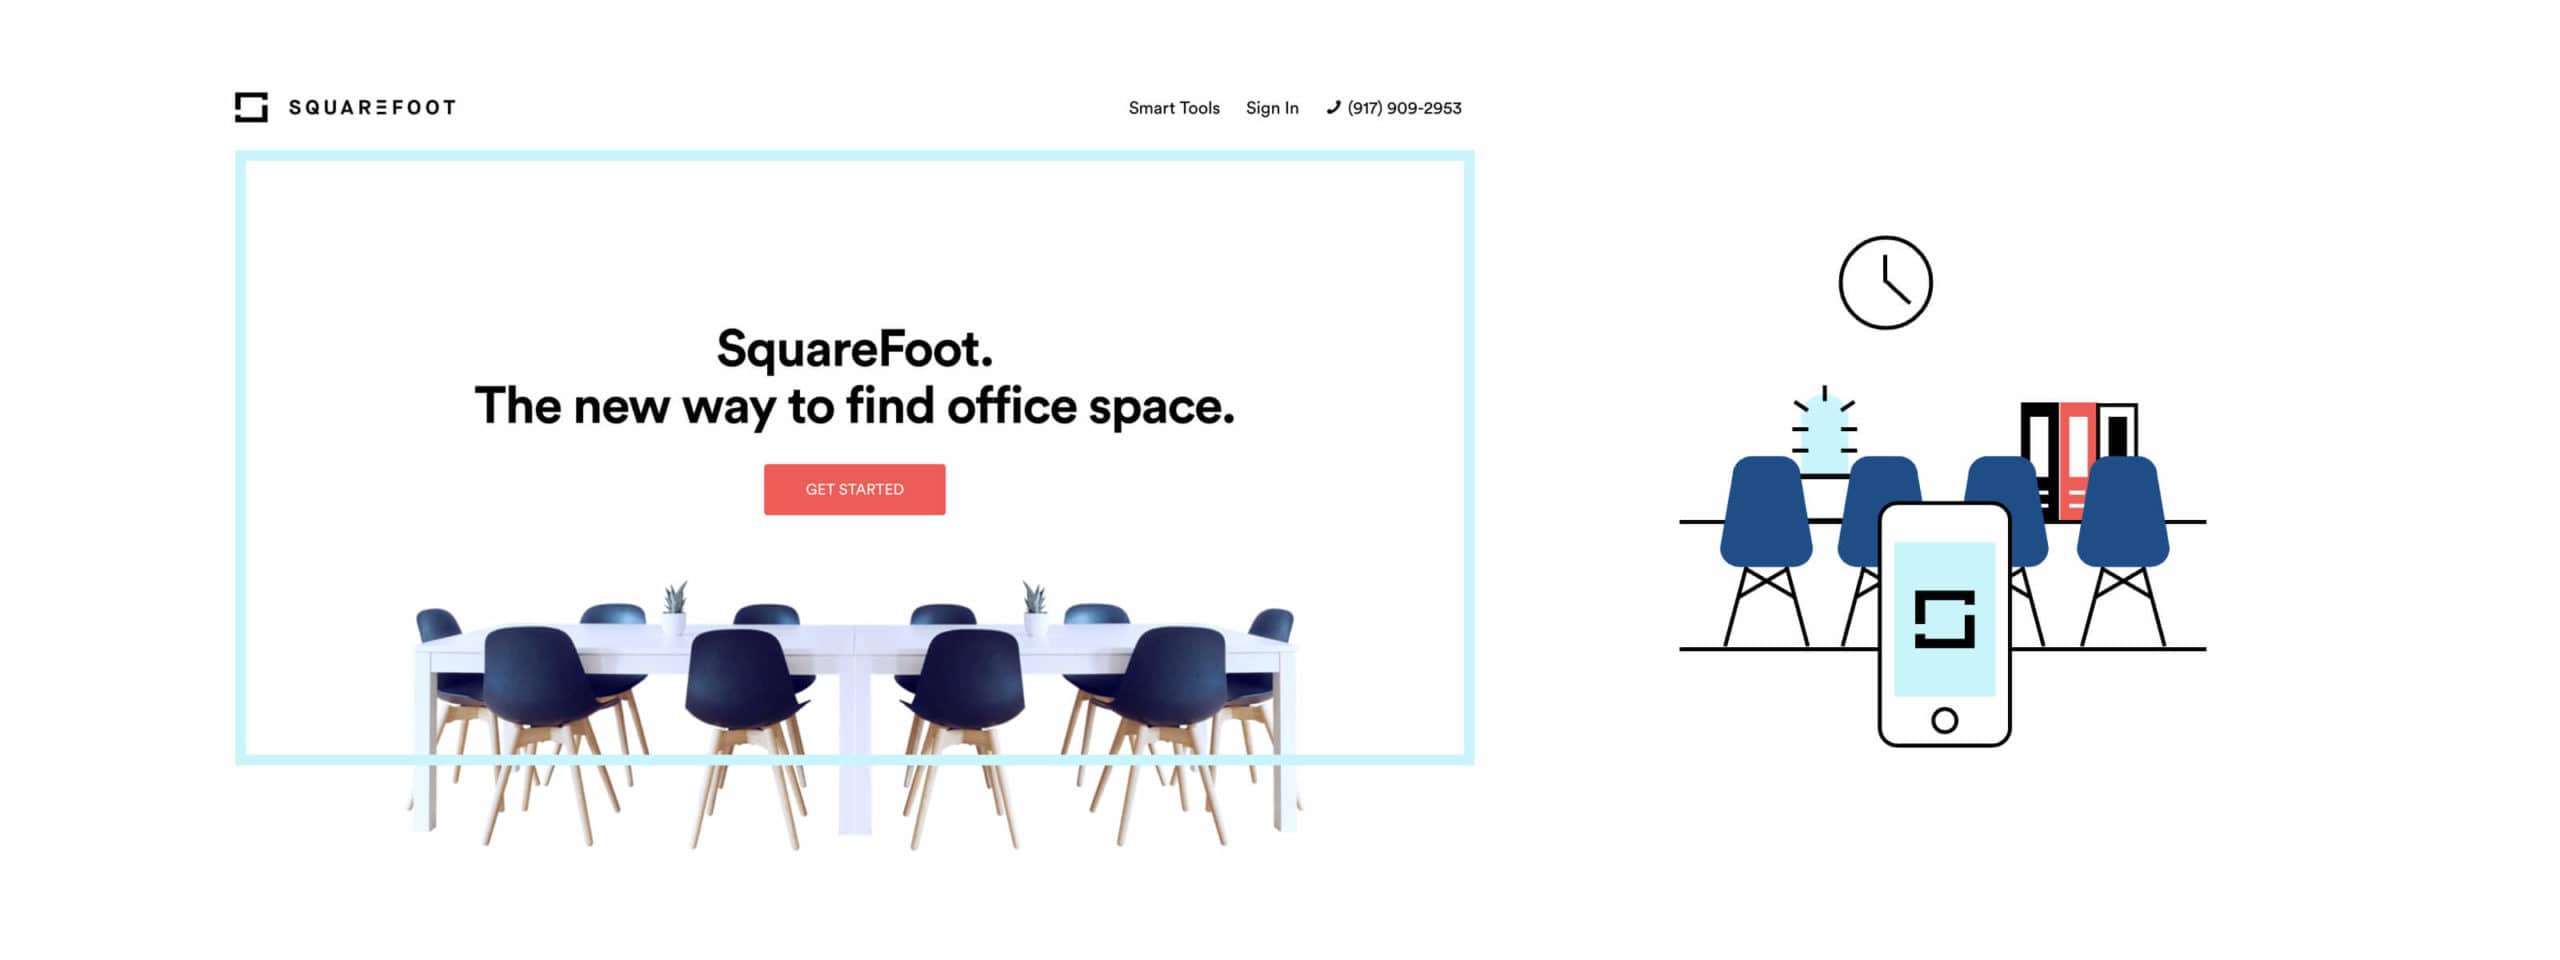 SquareFoot homepage hero and illustration